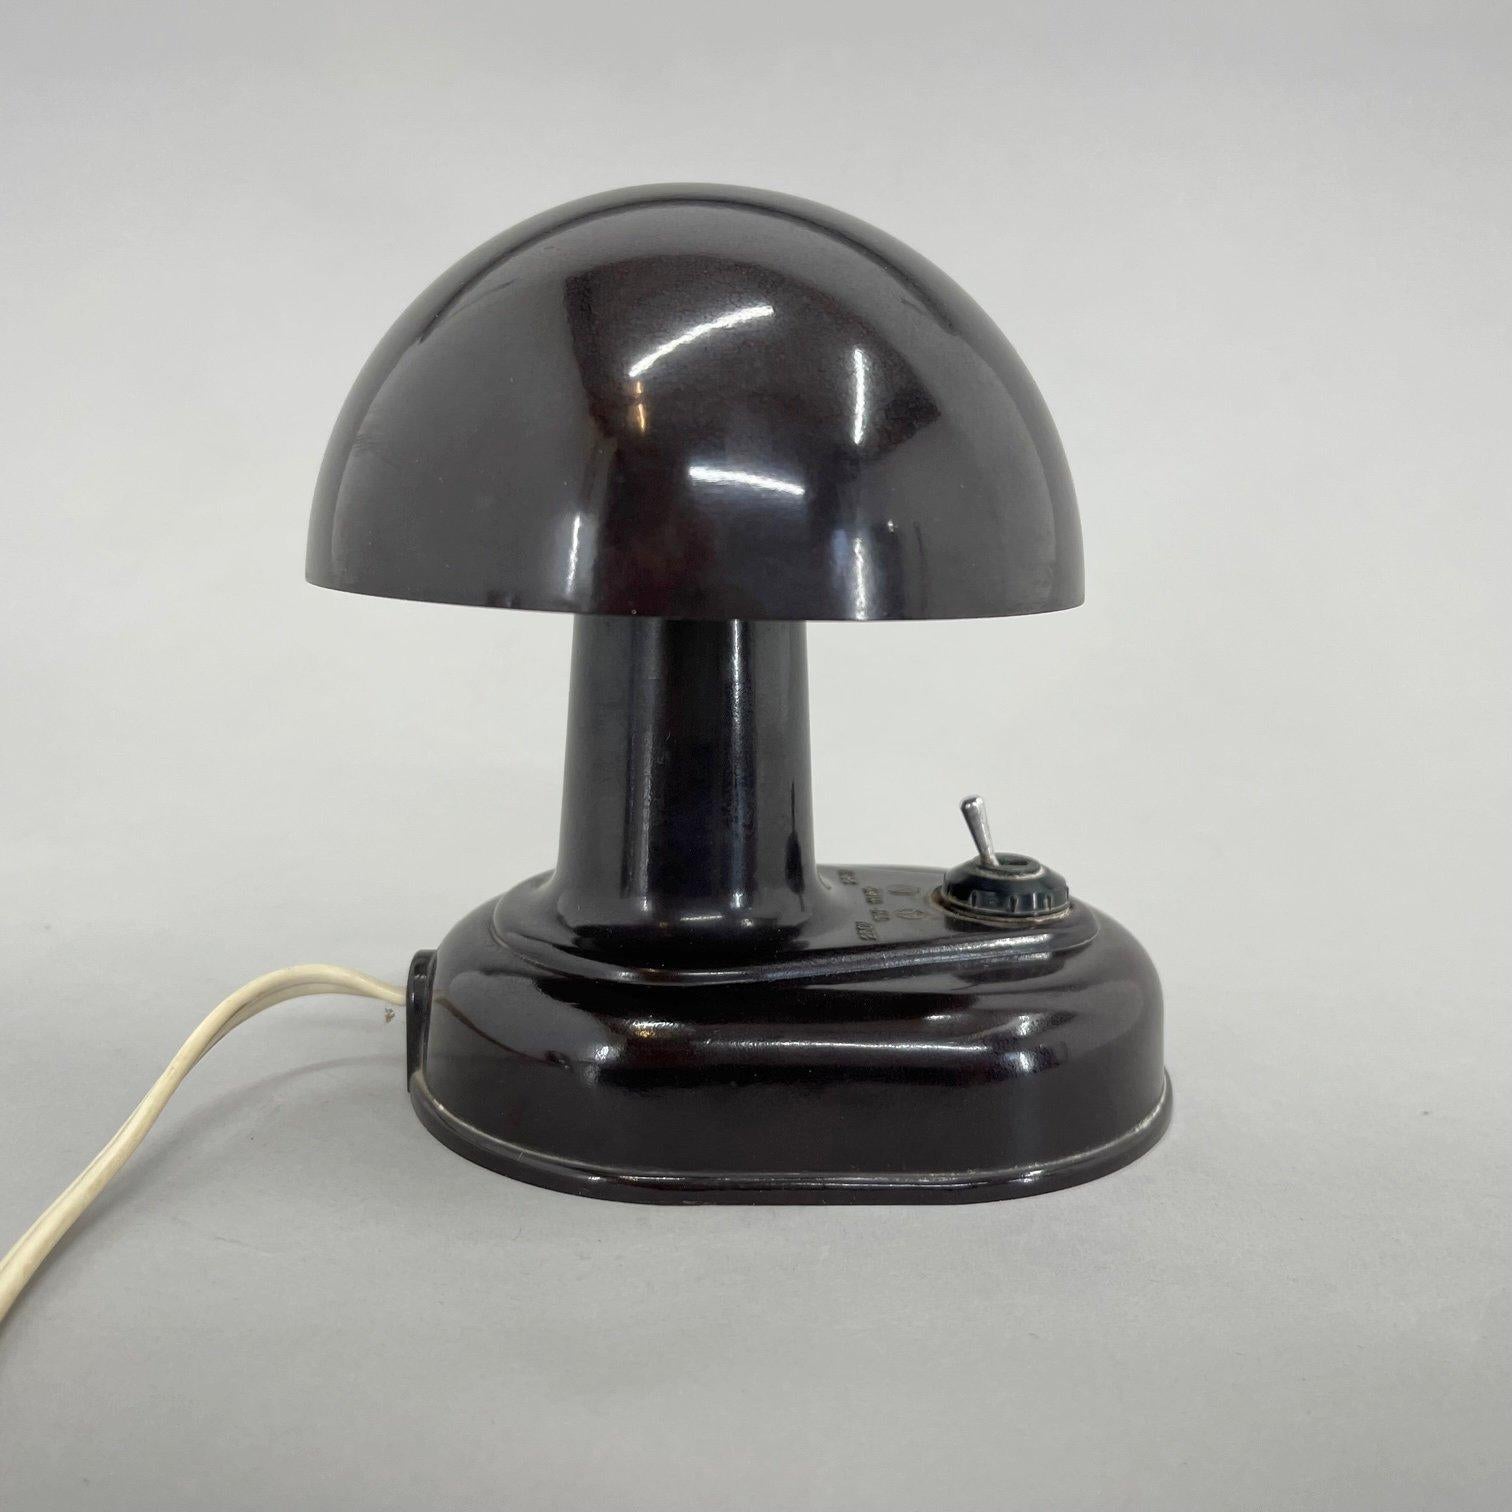 Little table or wall bakelite lamp from Czechoslovakia. The lamp is usually used as a table lamp, but it can be hanged on the wall as well.